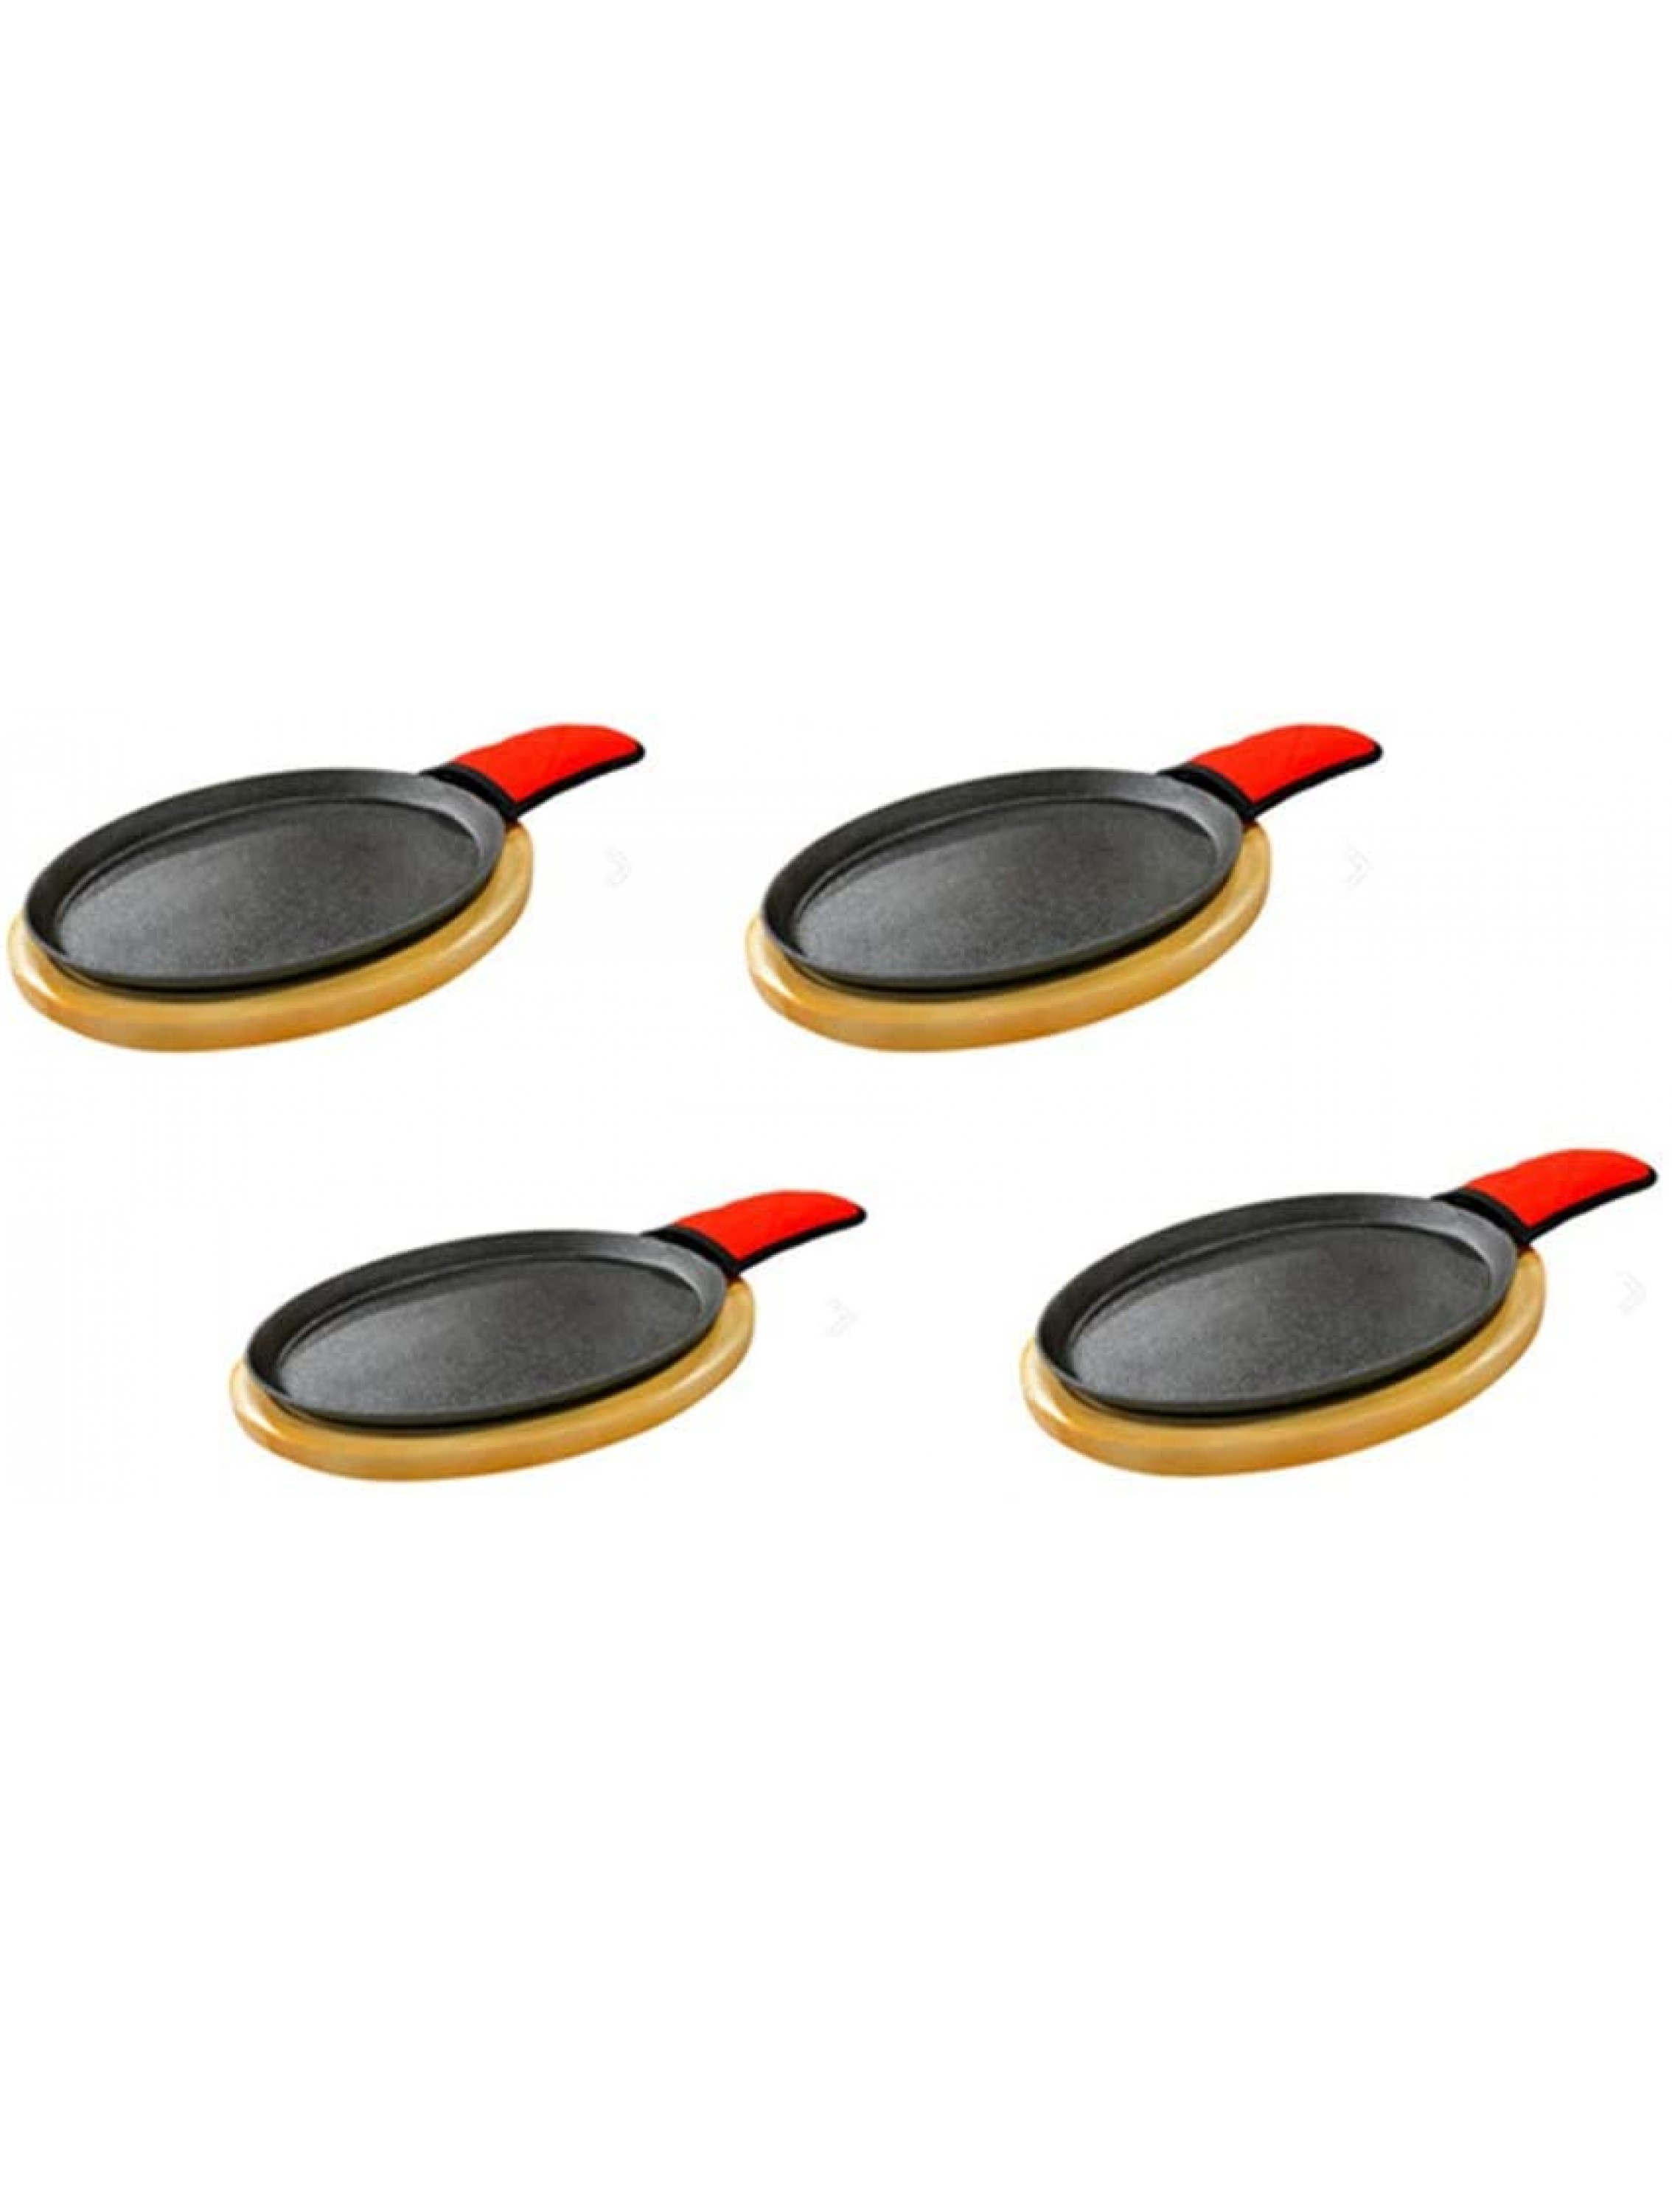 Brooks AG Parts Four Pre-seasoned Cast Iron Fajita Pan Sets,Includes Wooden Serving Bases,Padded Handle Sleeve and Cast Iron Skillet - B8BKESX5L